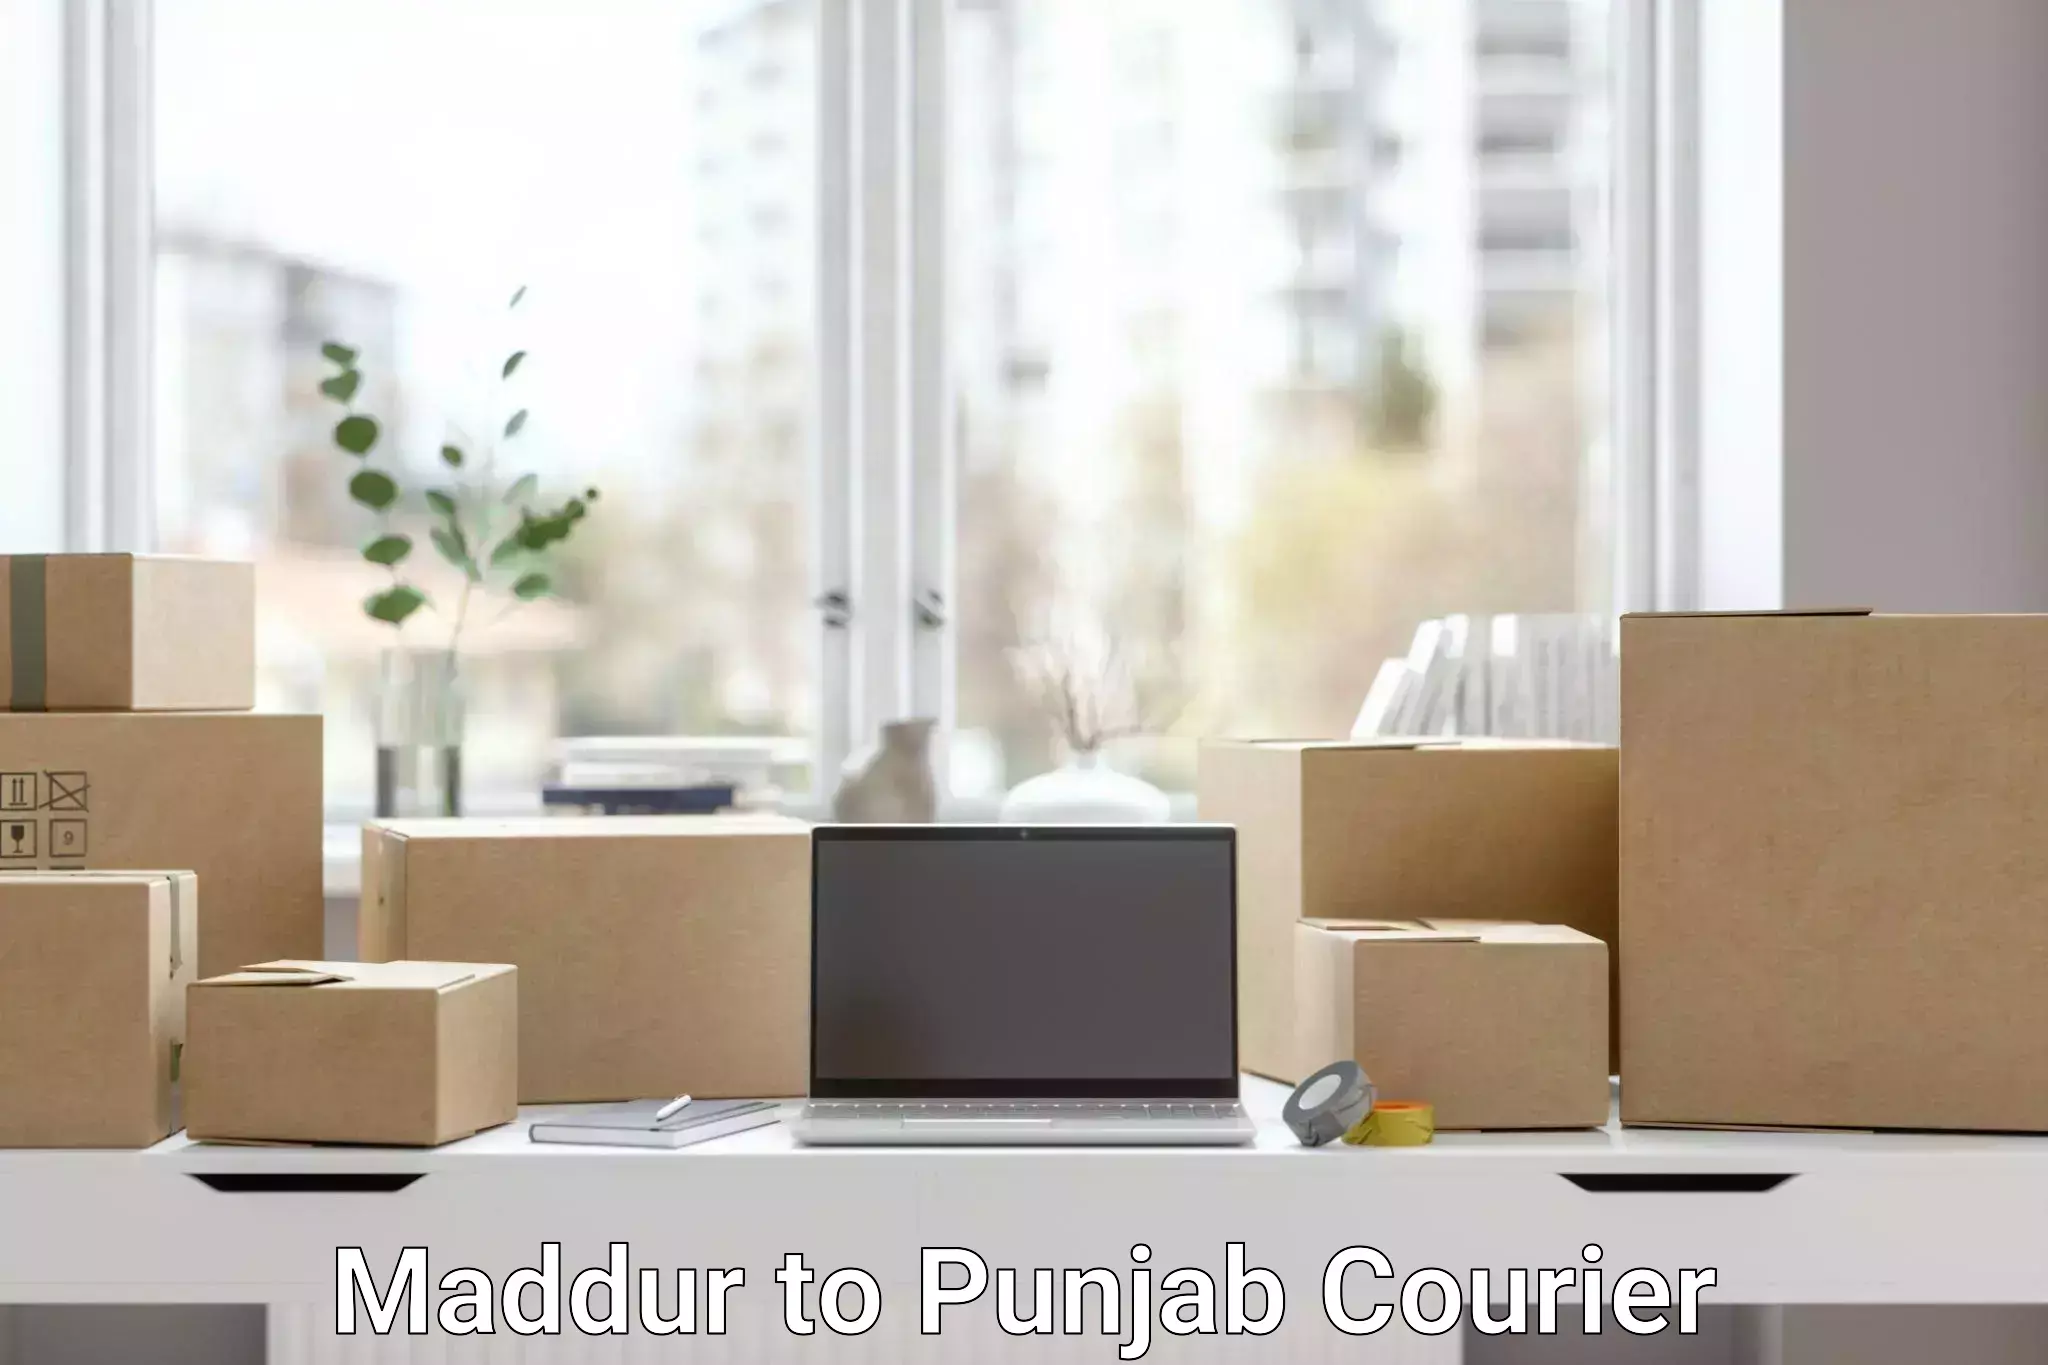 Express delivery solutions Maddur to Punjab